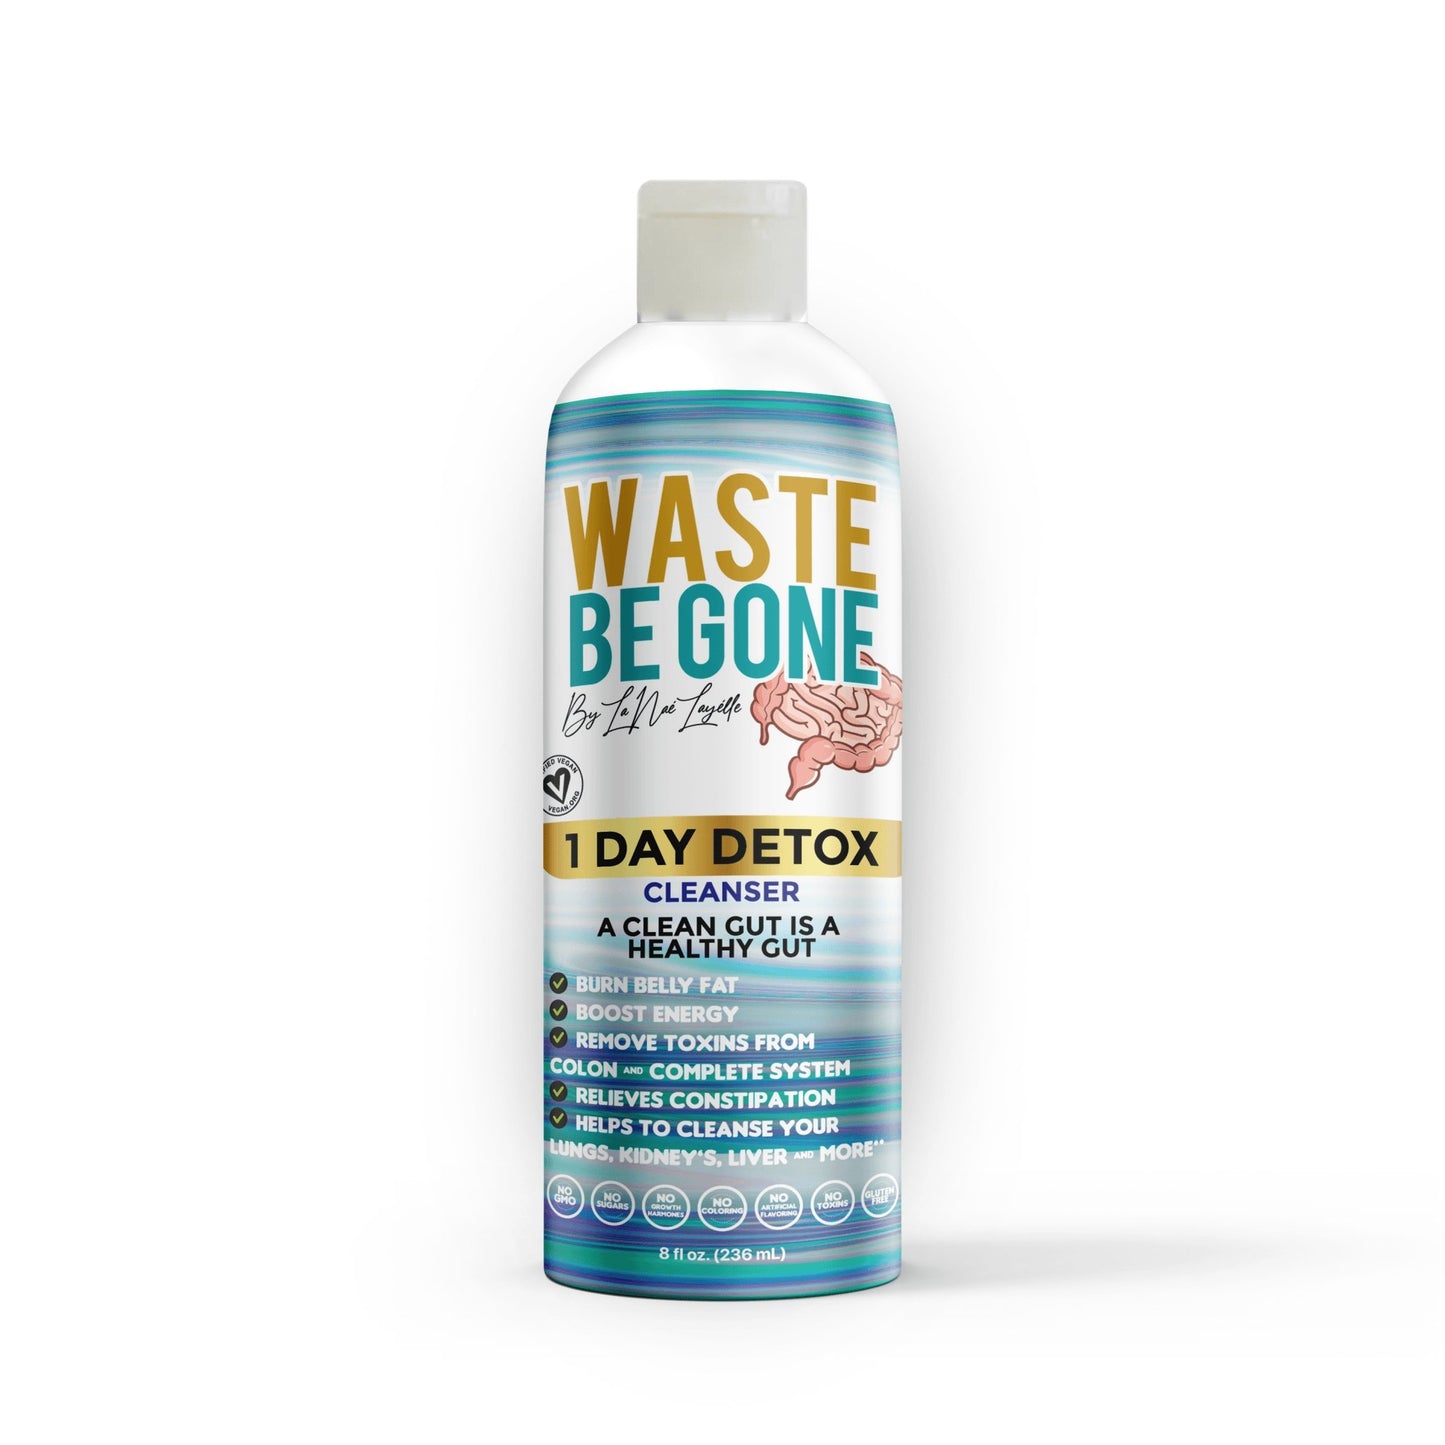 1 Day Detox Cleanser front side - Waistbegoneofficial